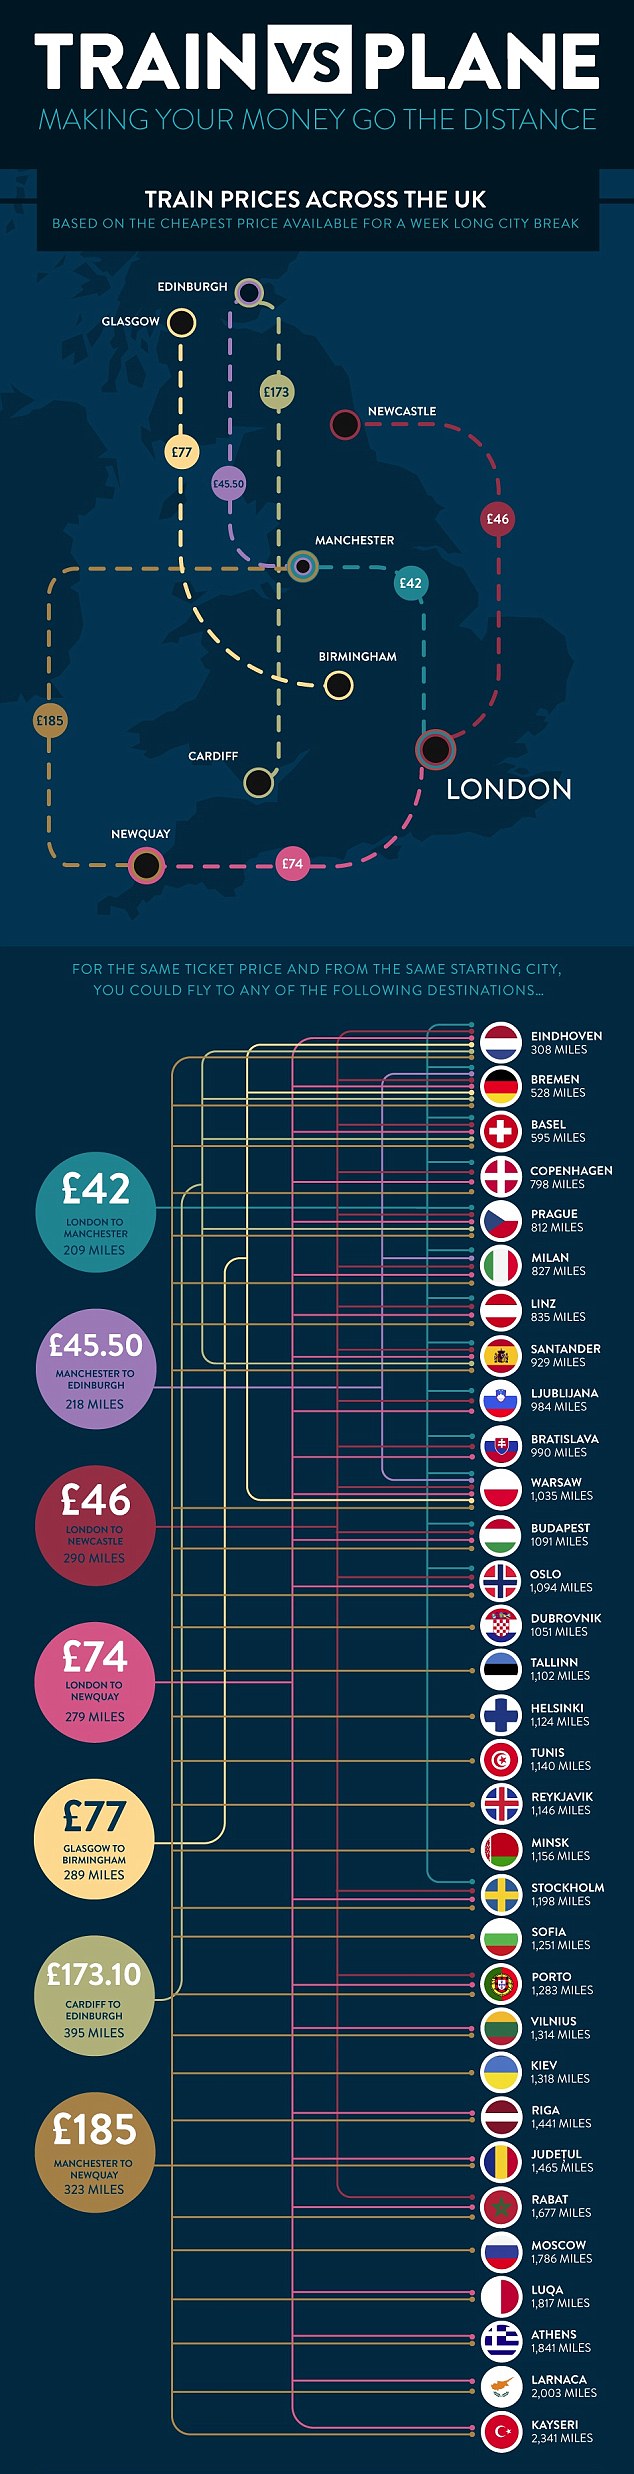 An average 34-mile journey from Luton to London Blackfriars costs £27.50, the same price as a ticket from Luton to Copenhagen - an 800 mile journey